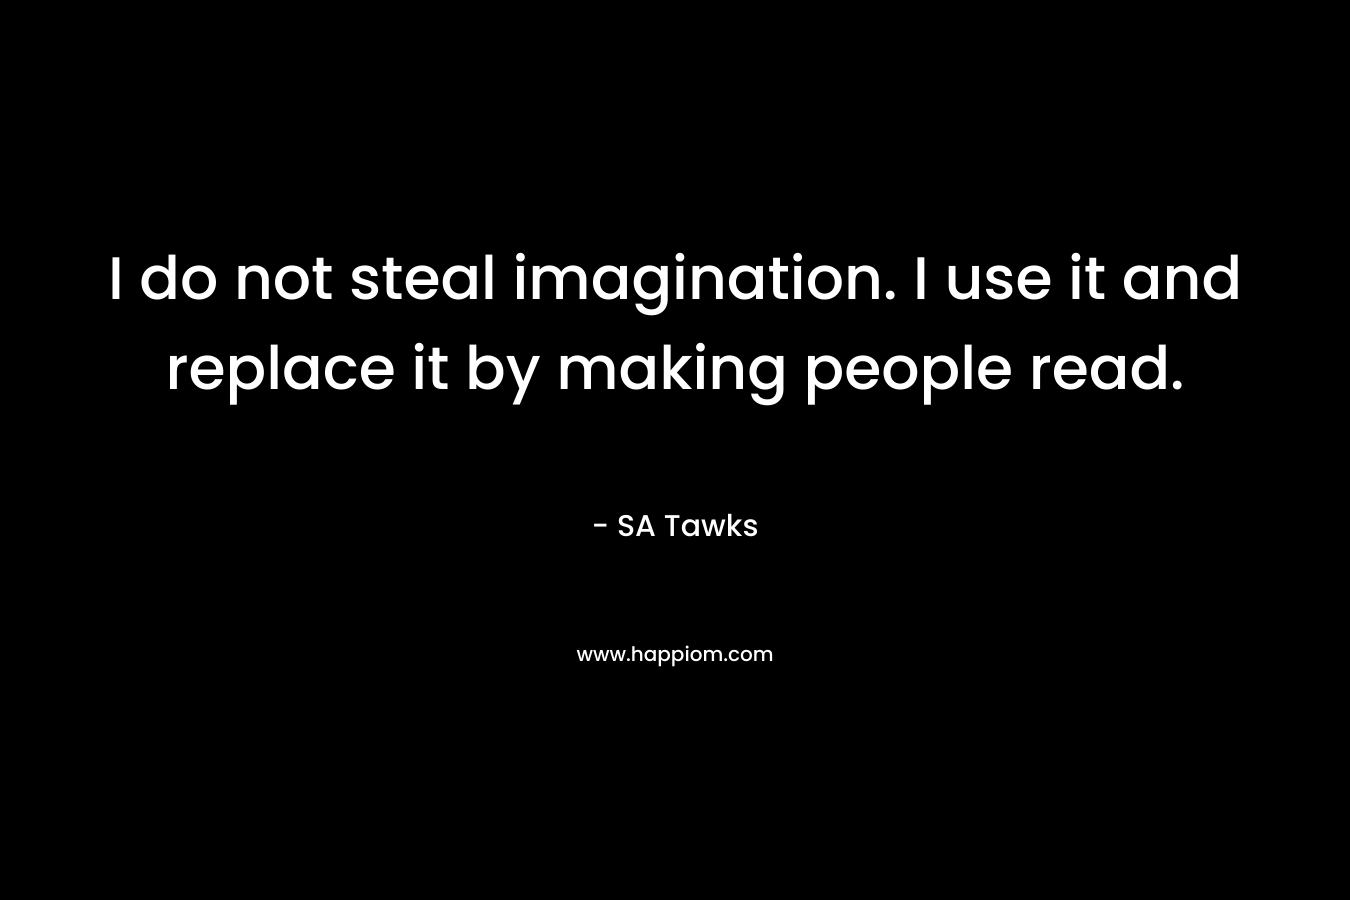 I do not steal imagination. I use it and replace it by making people read.